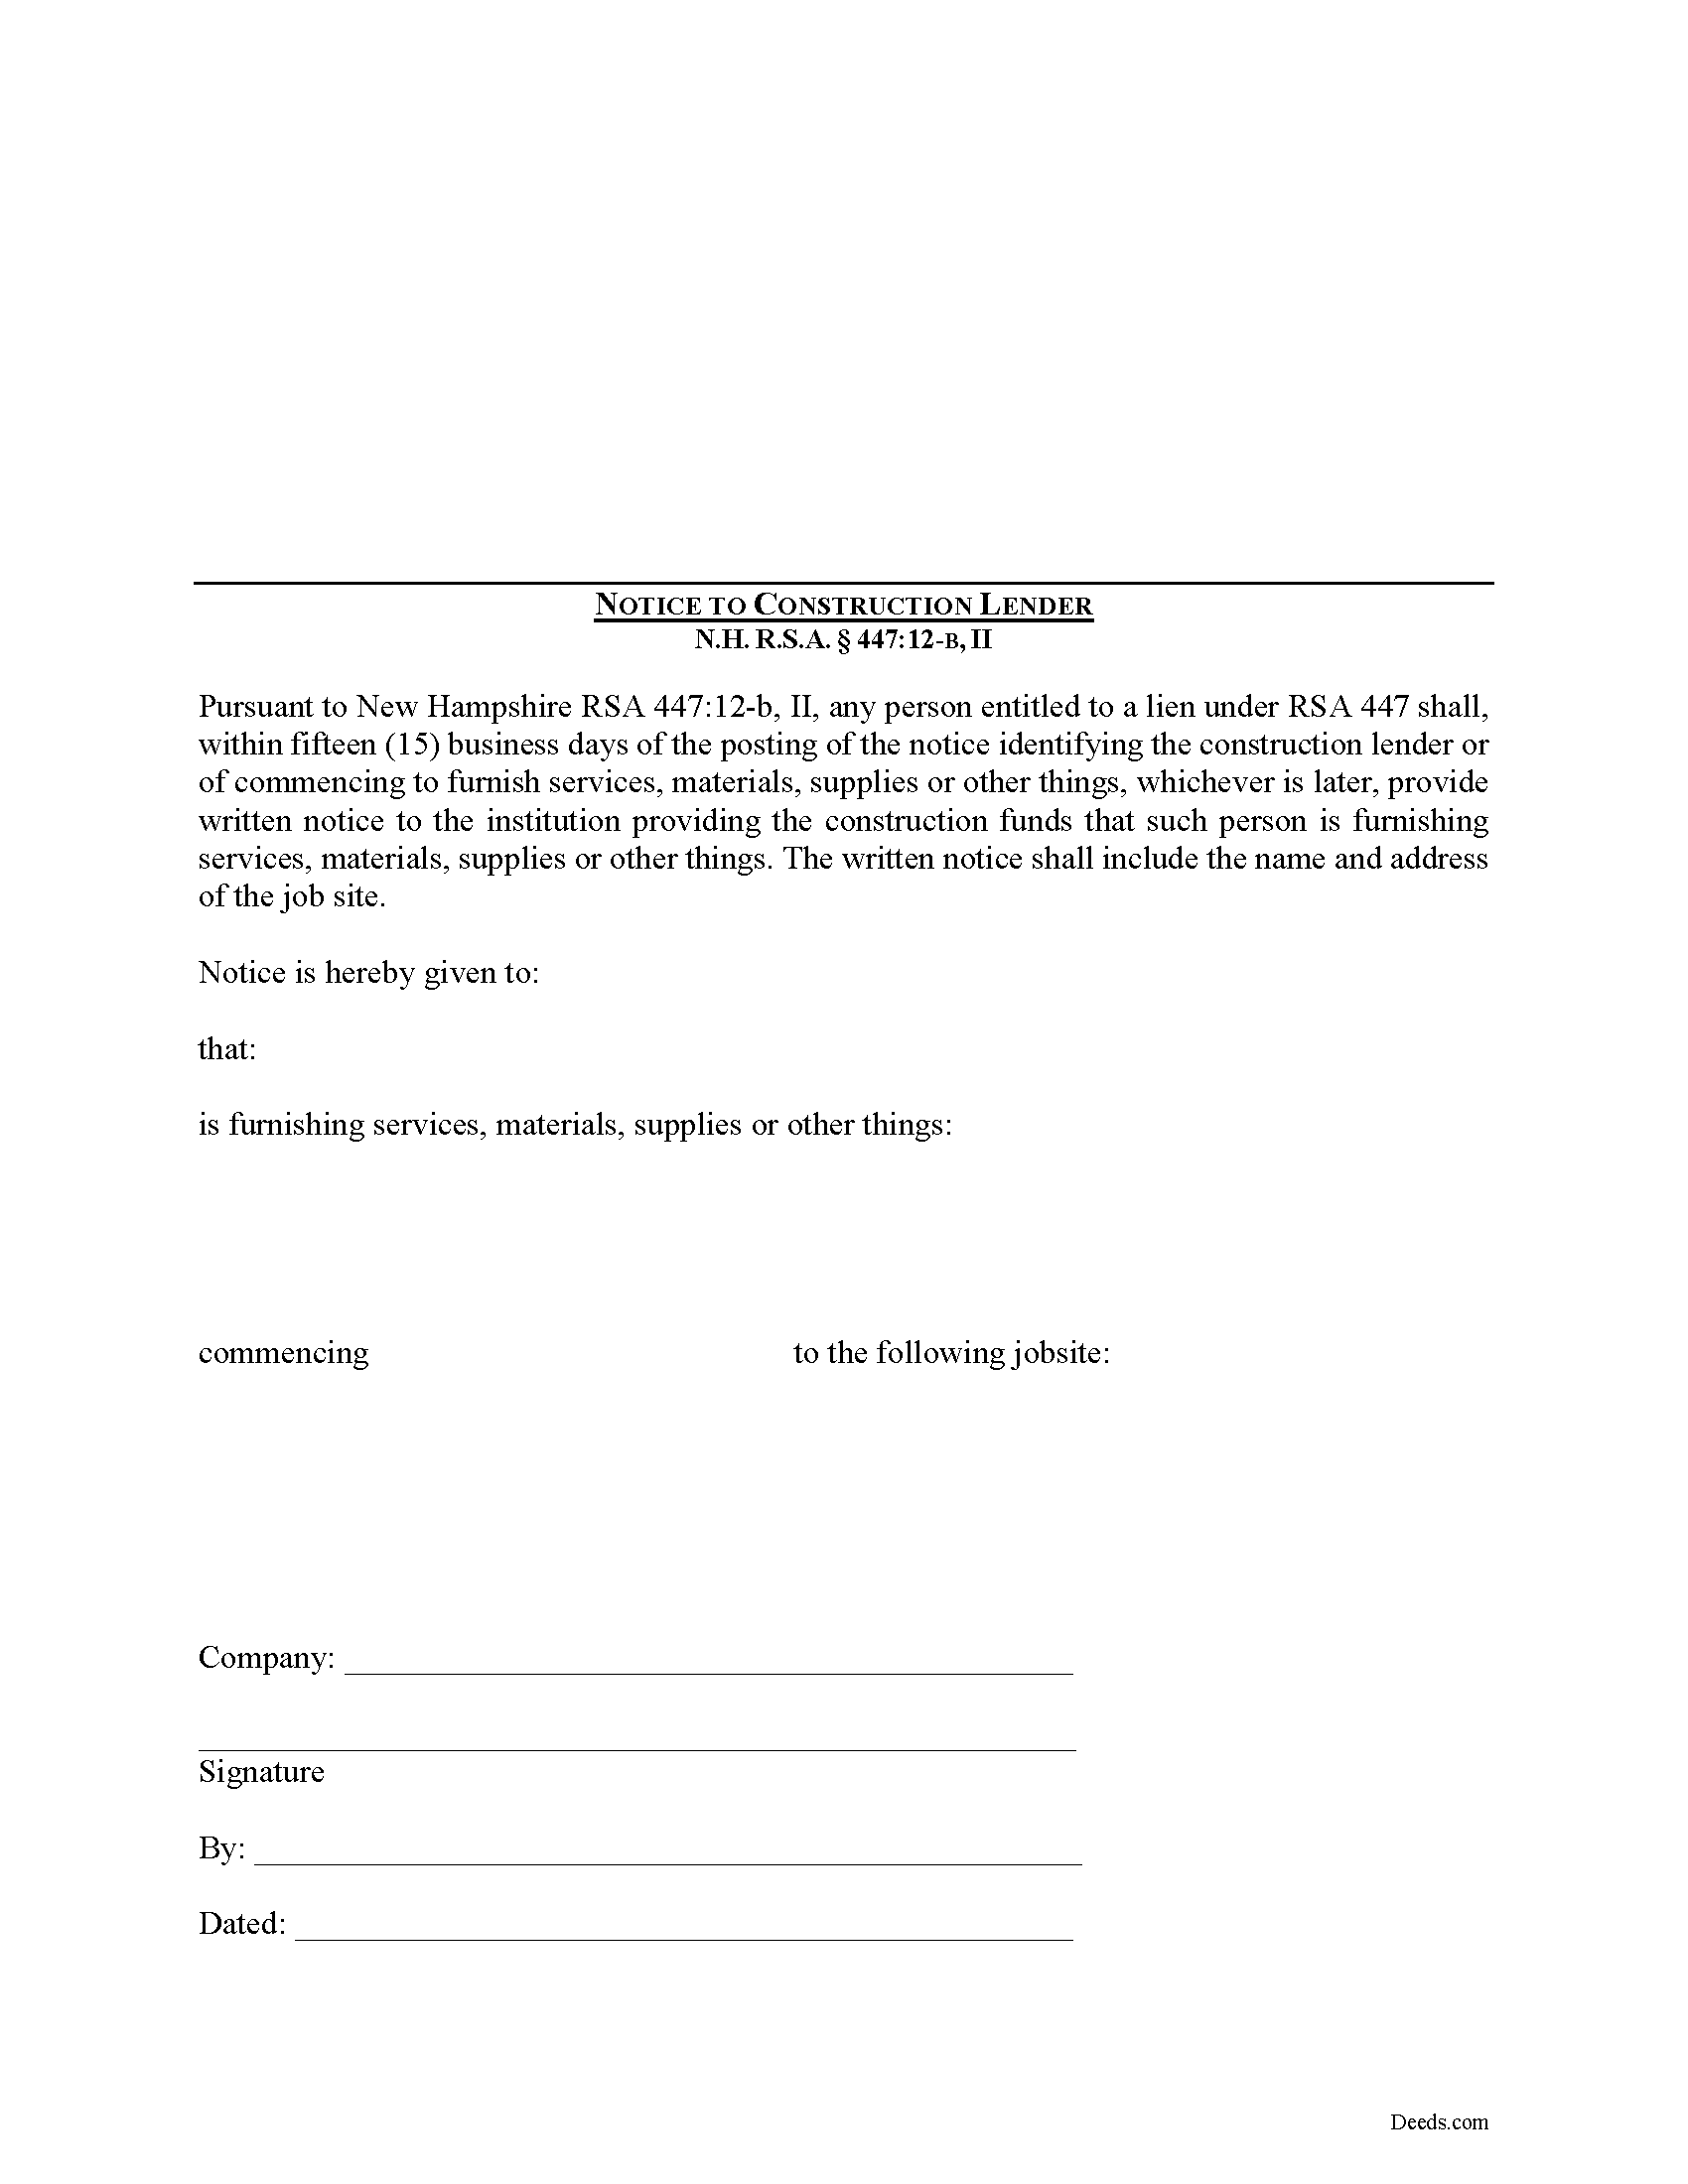 Notice to Construction Lender